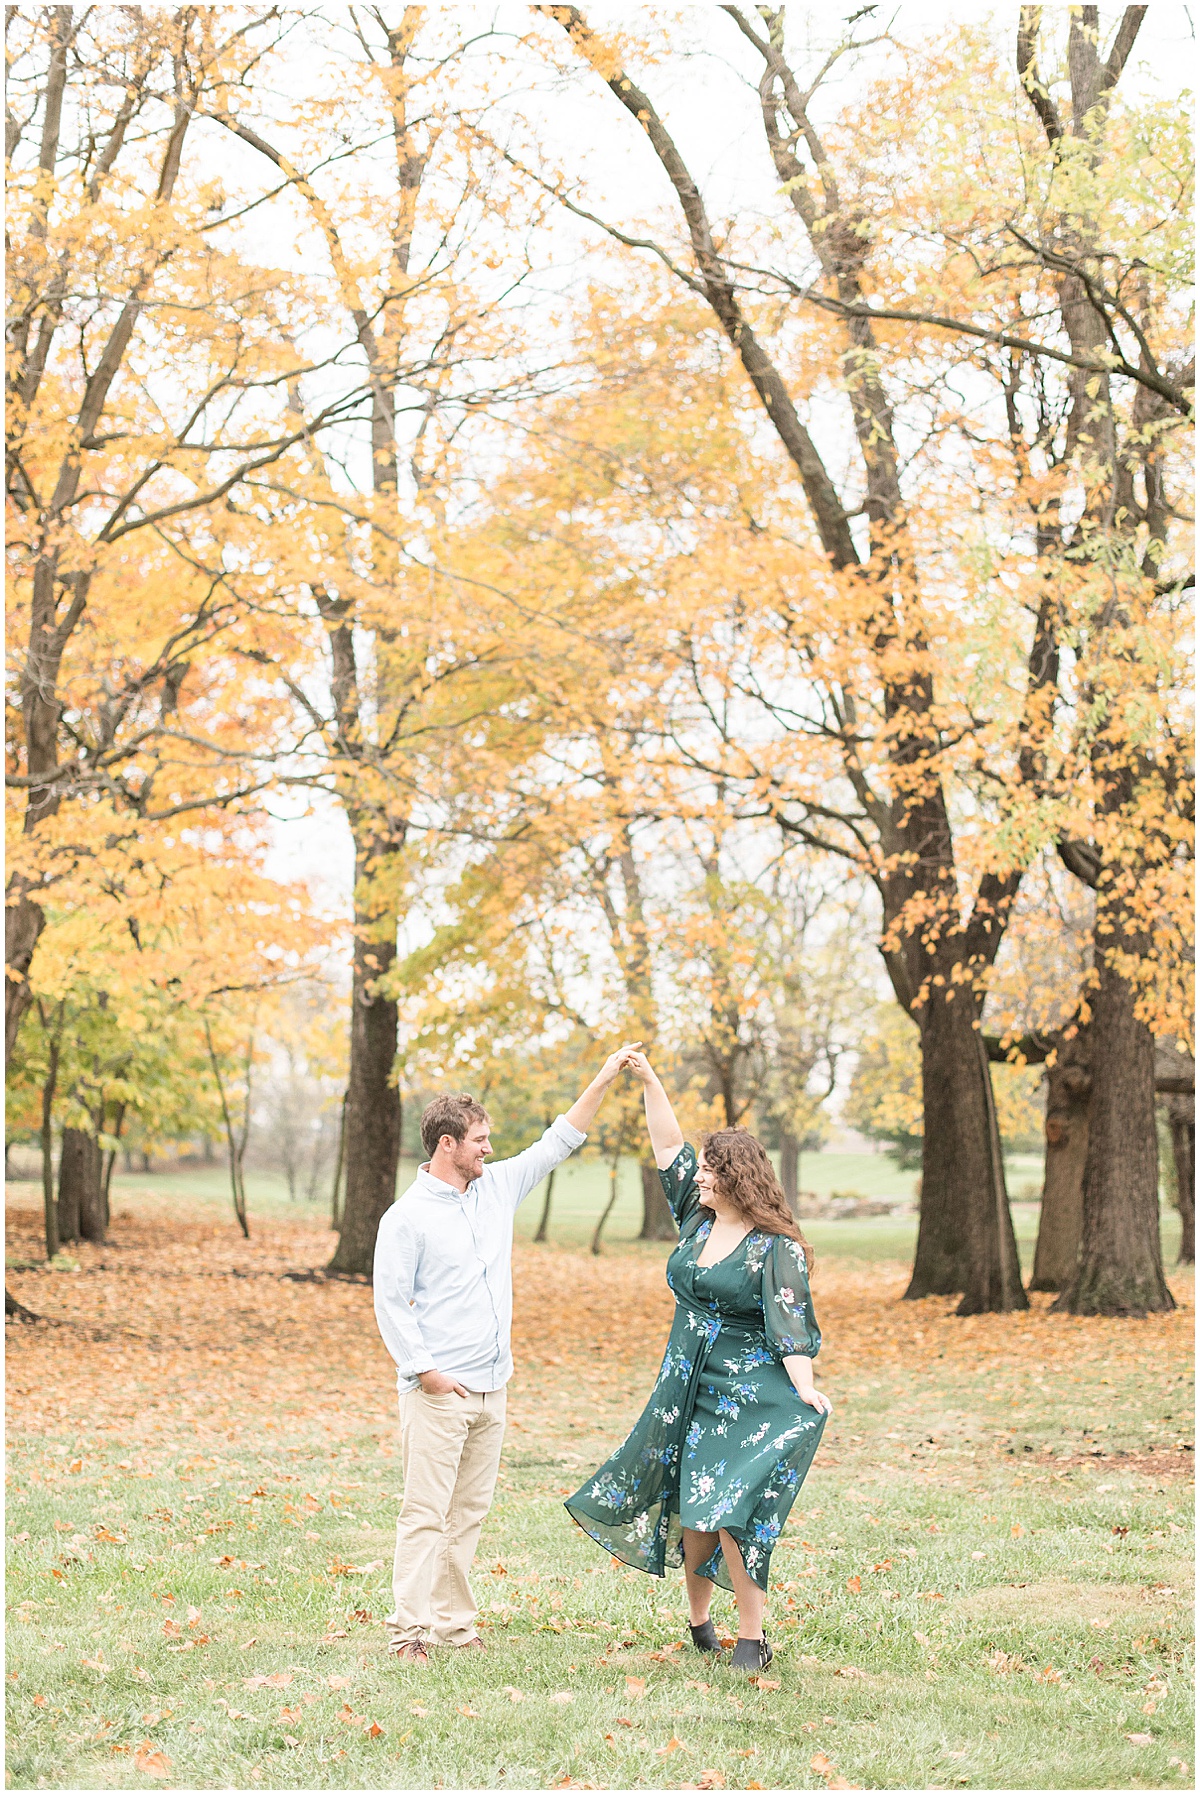 Couple dancing in fall leaves during engagement session by Indianapolis wedding photographer Victoria Rayburn Photography